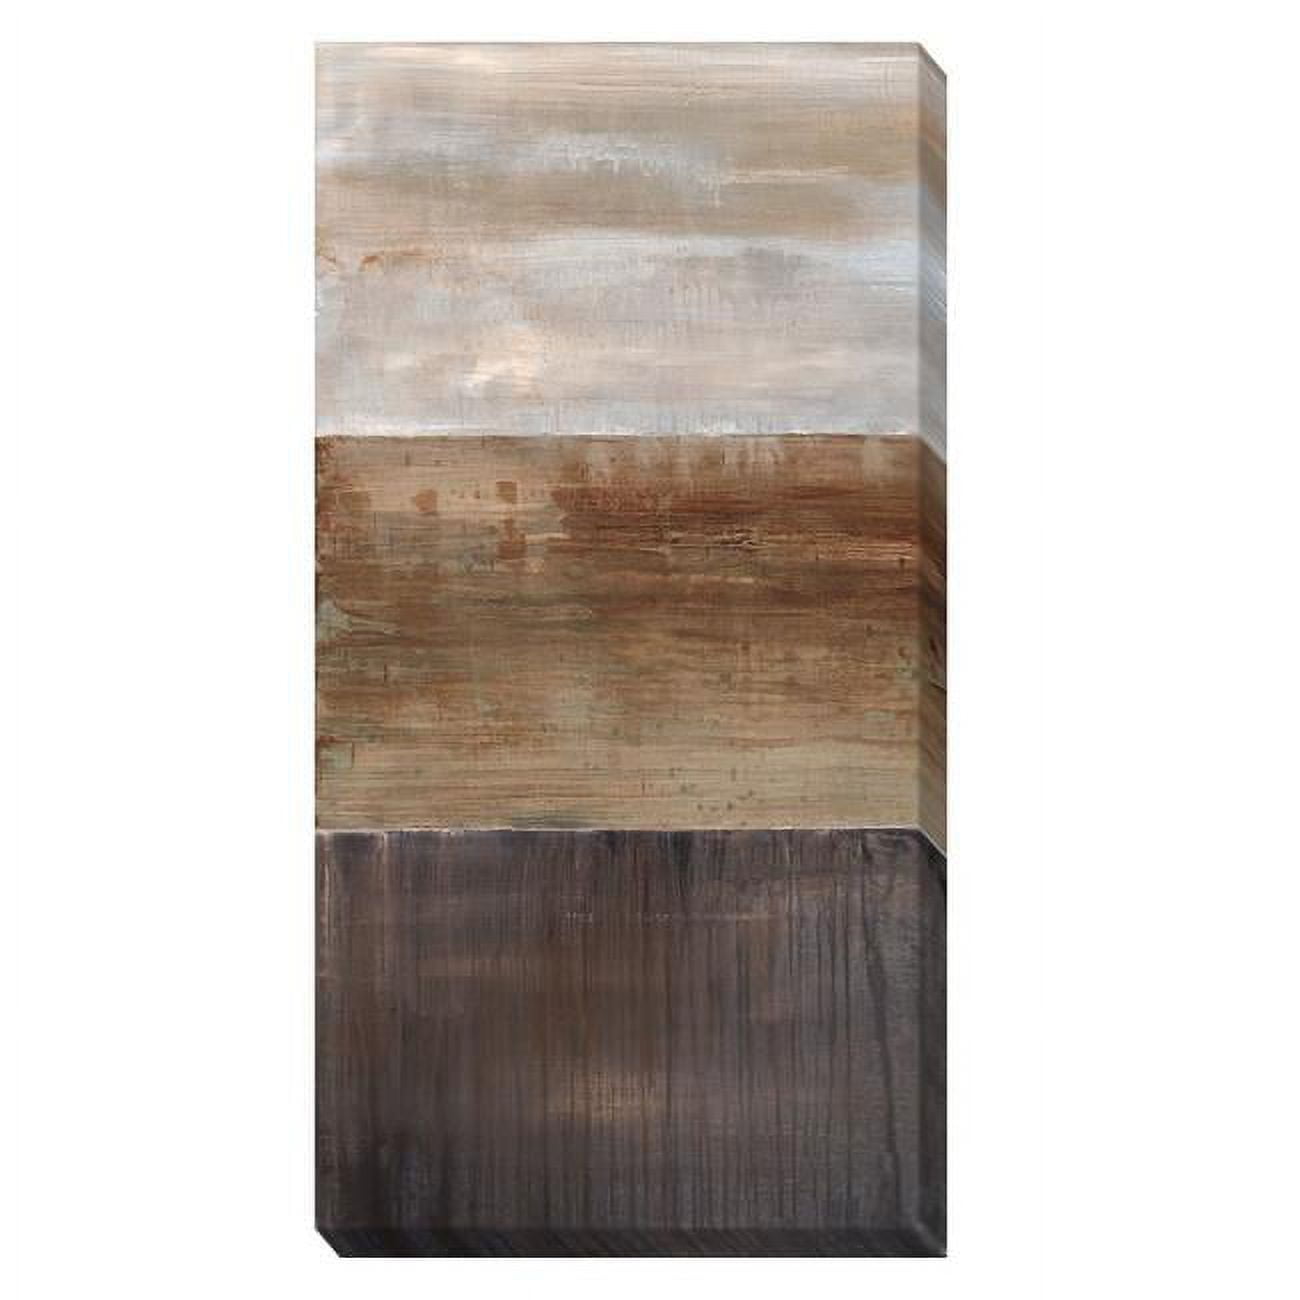 Foundation By Heather Ross Premium Gallery-wrapped Canvas Giclee Art - Ready To Hang, 12 X 24 X 1.5 In.